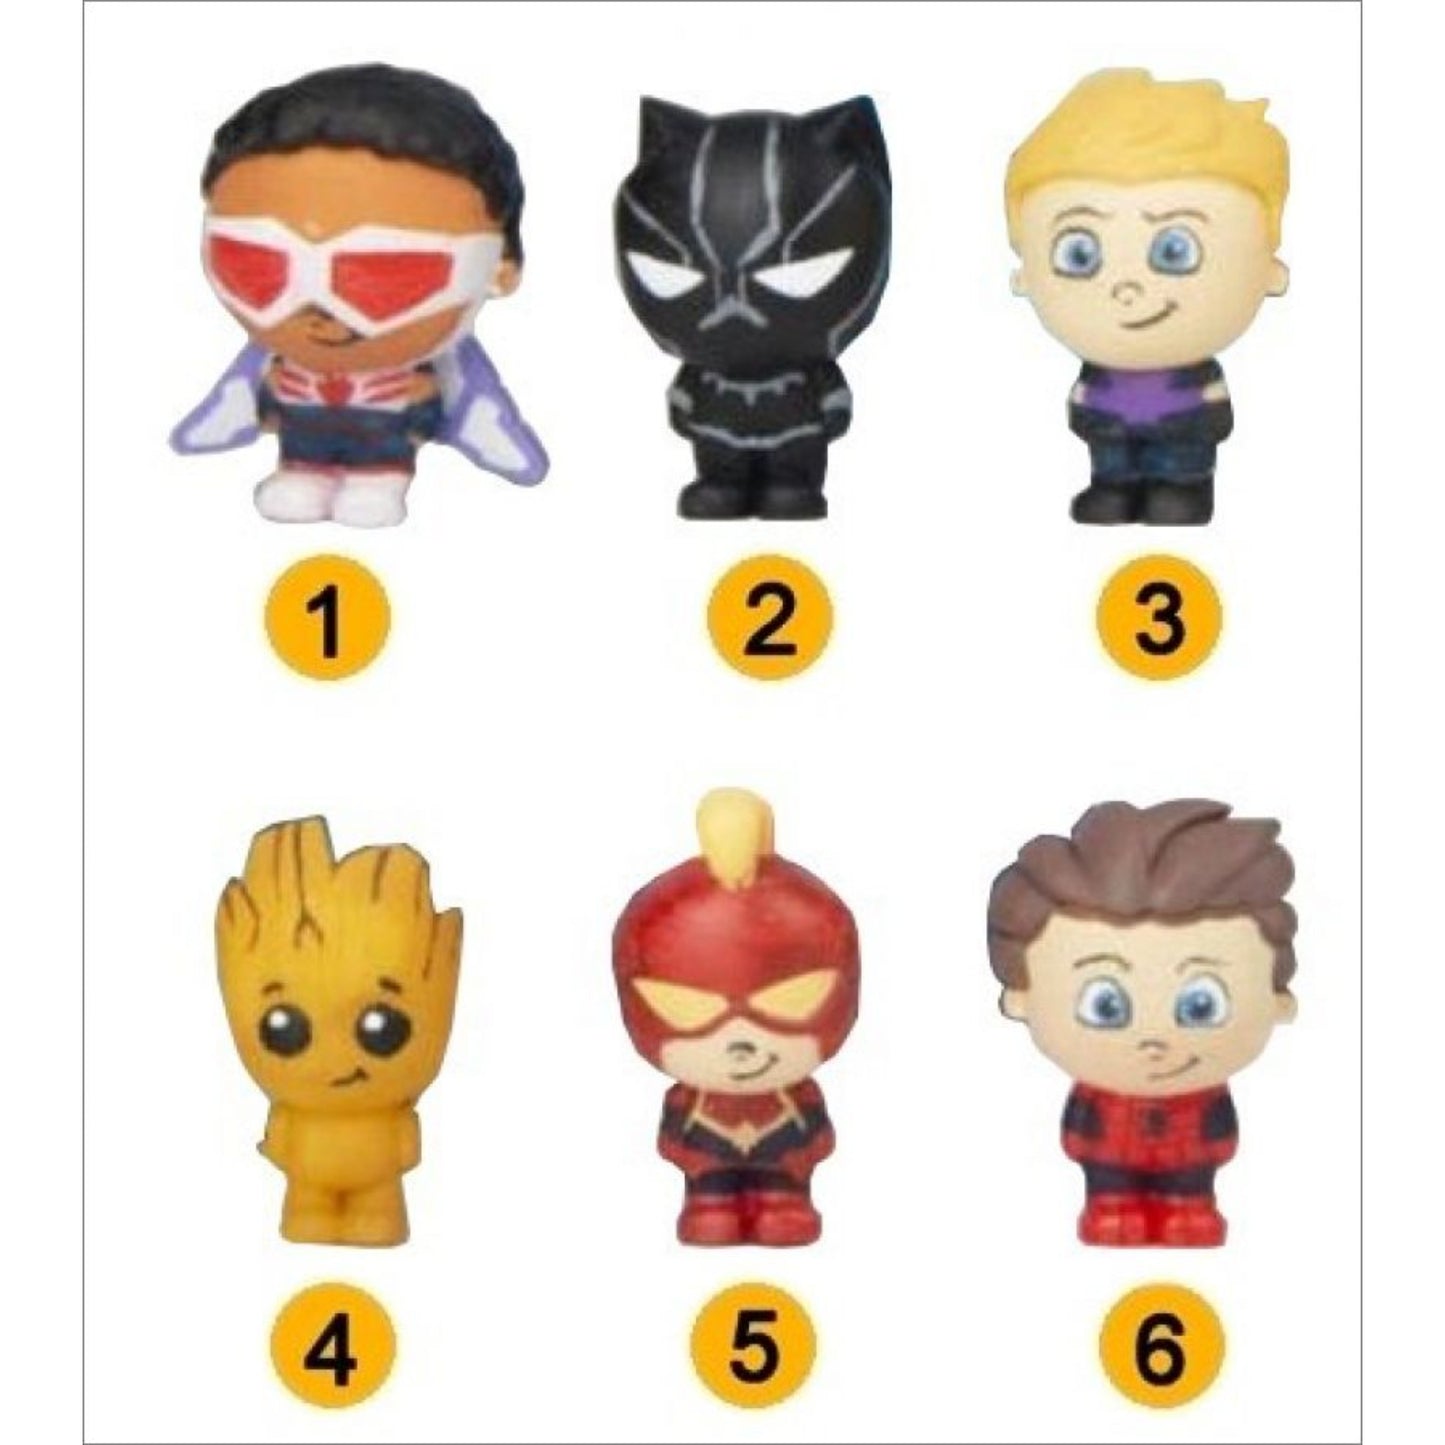 Marvel 3D Puzzle Eraser - Assorted - 6 to Collect